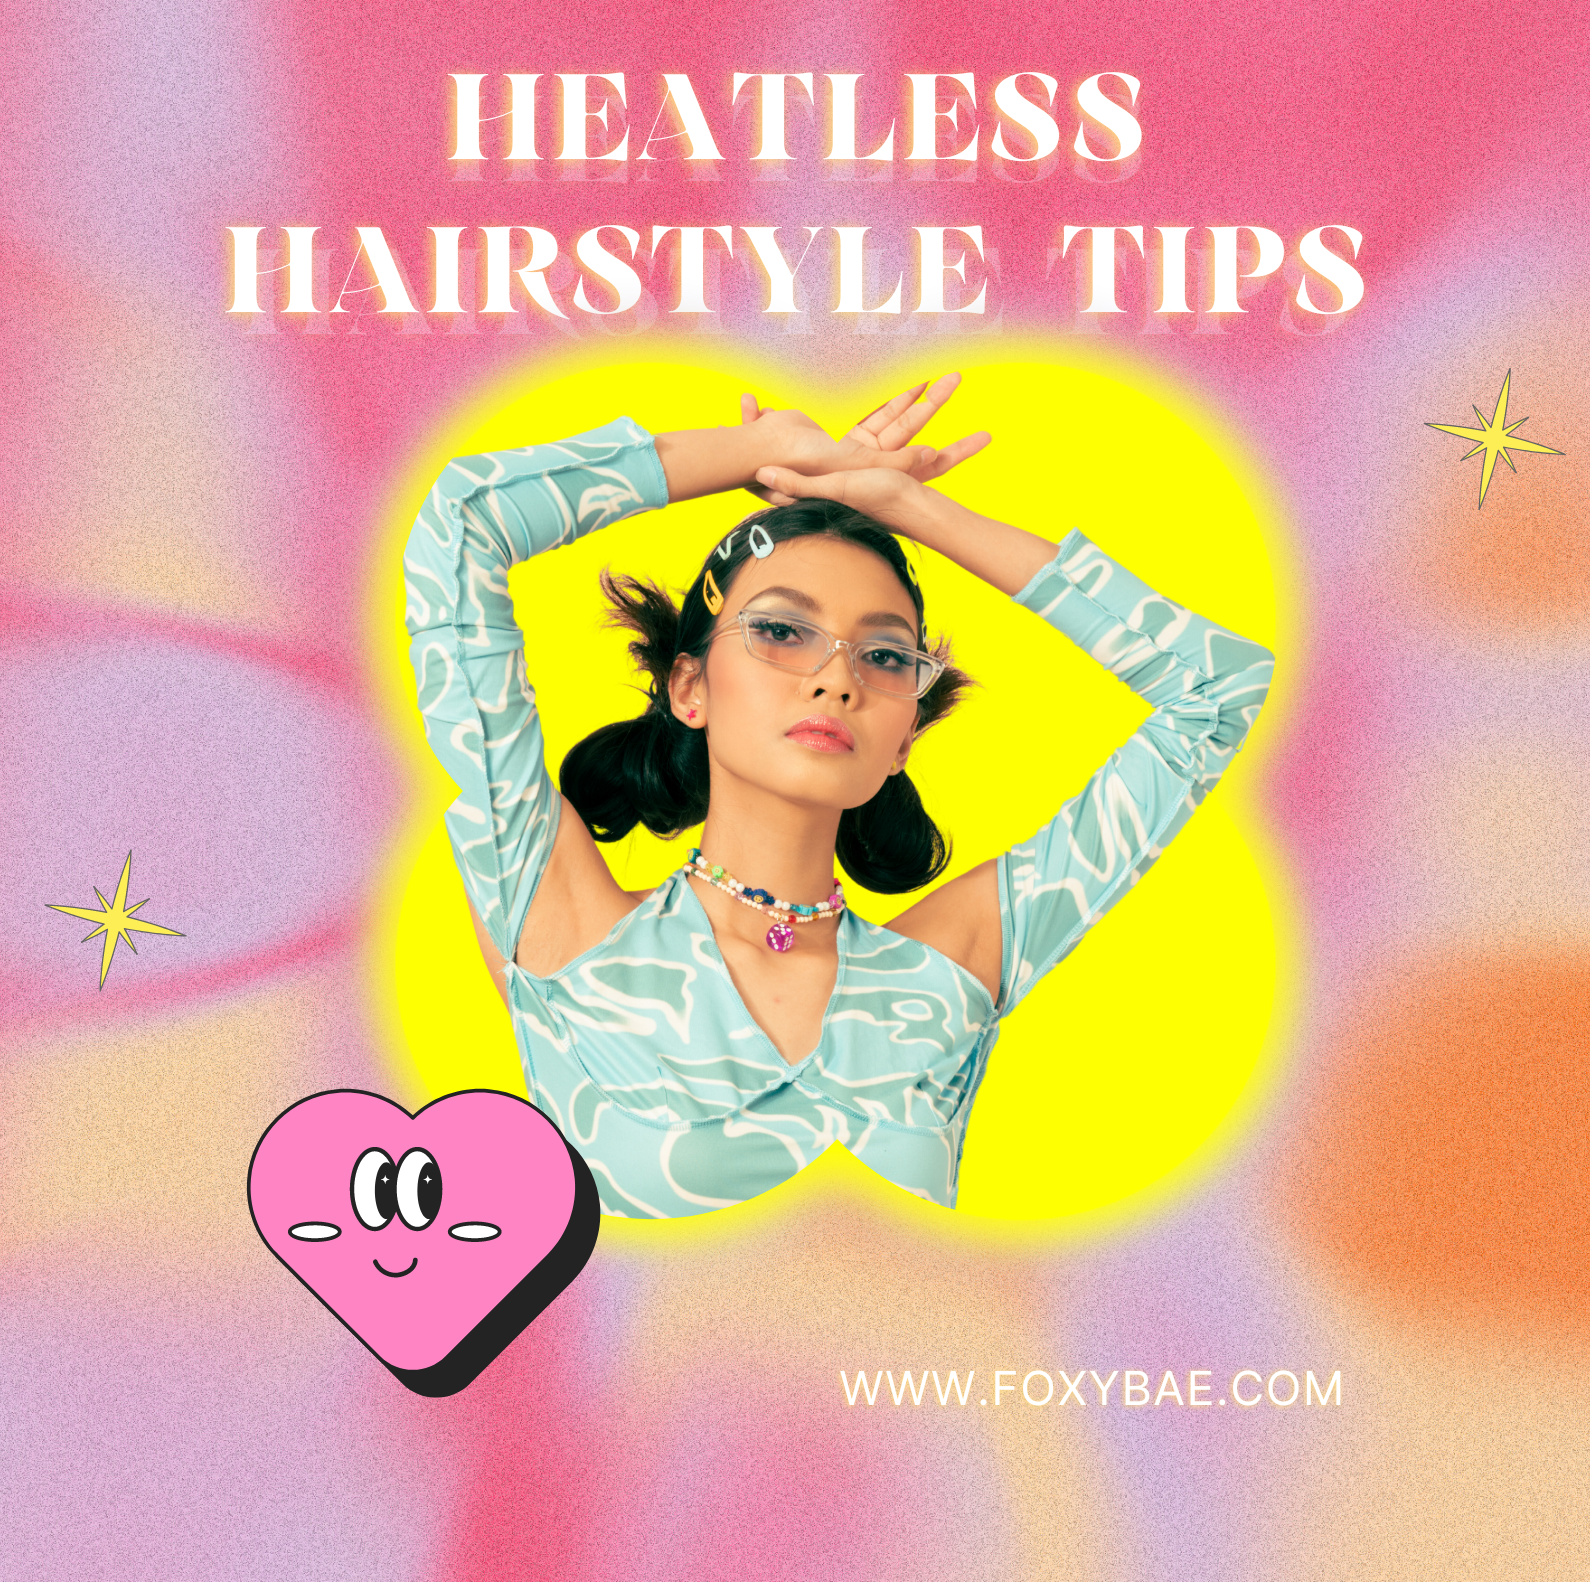 Top Tips for Heatless Hairstyles — From Products to Looks! image